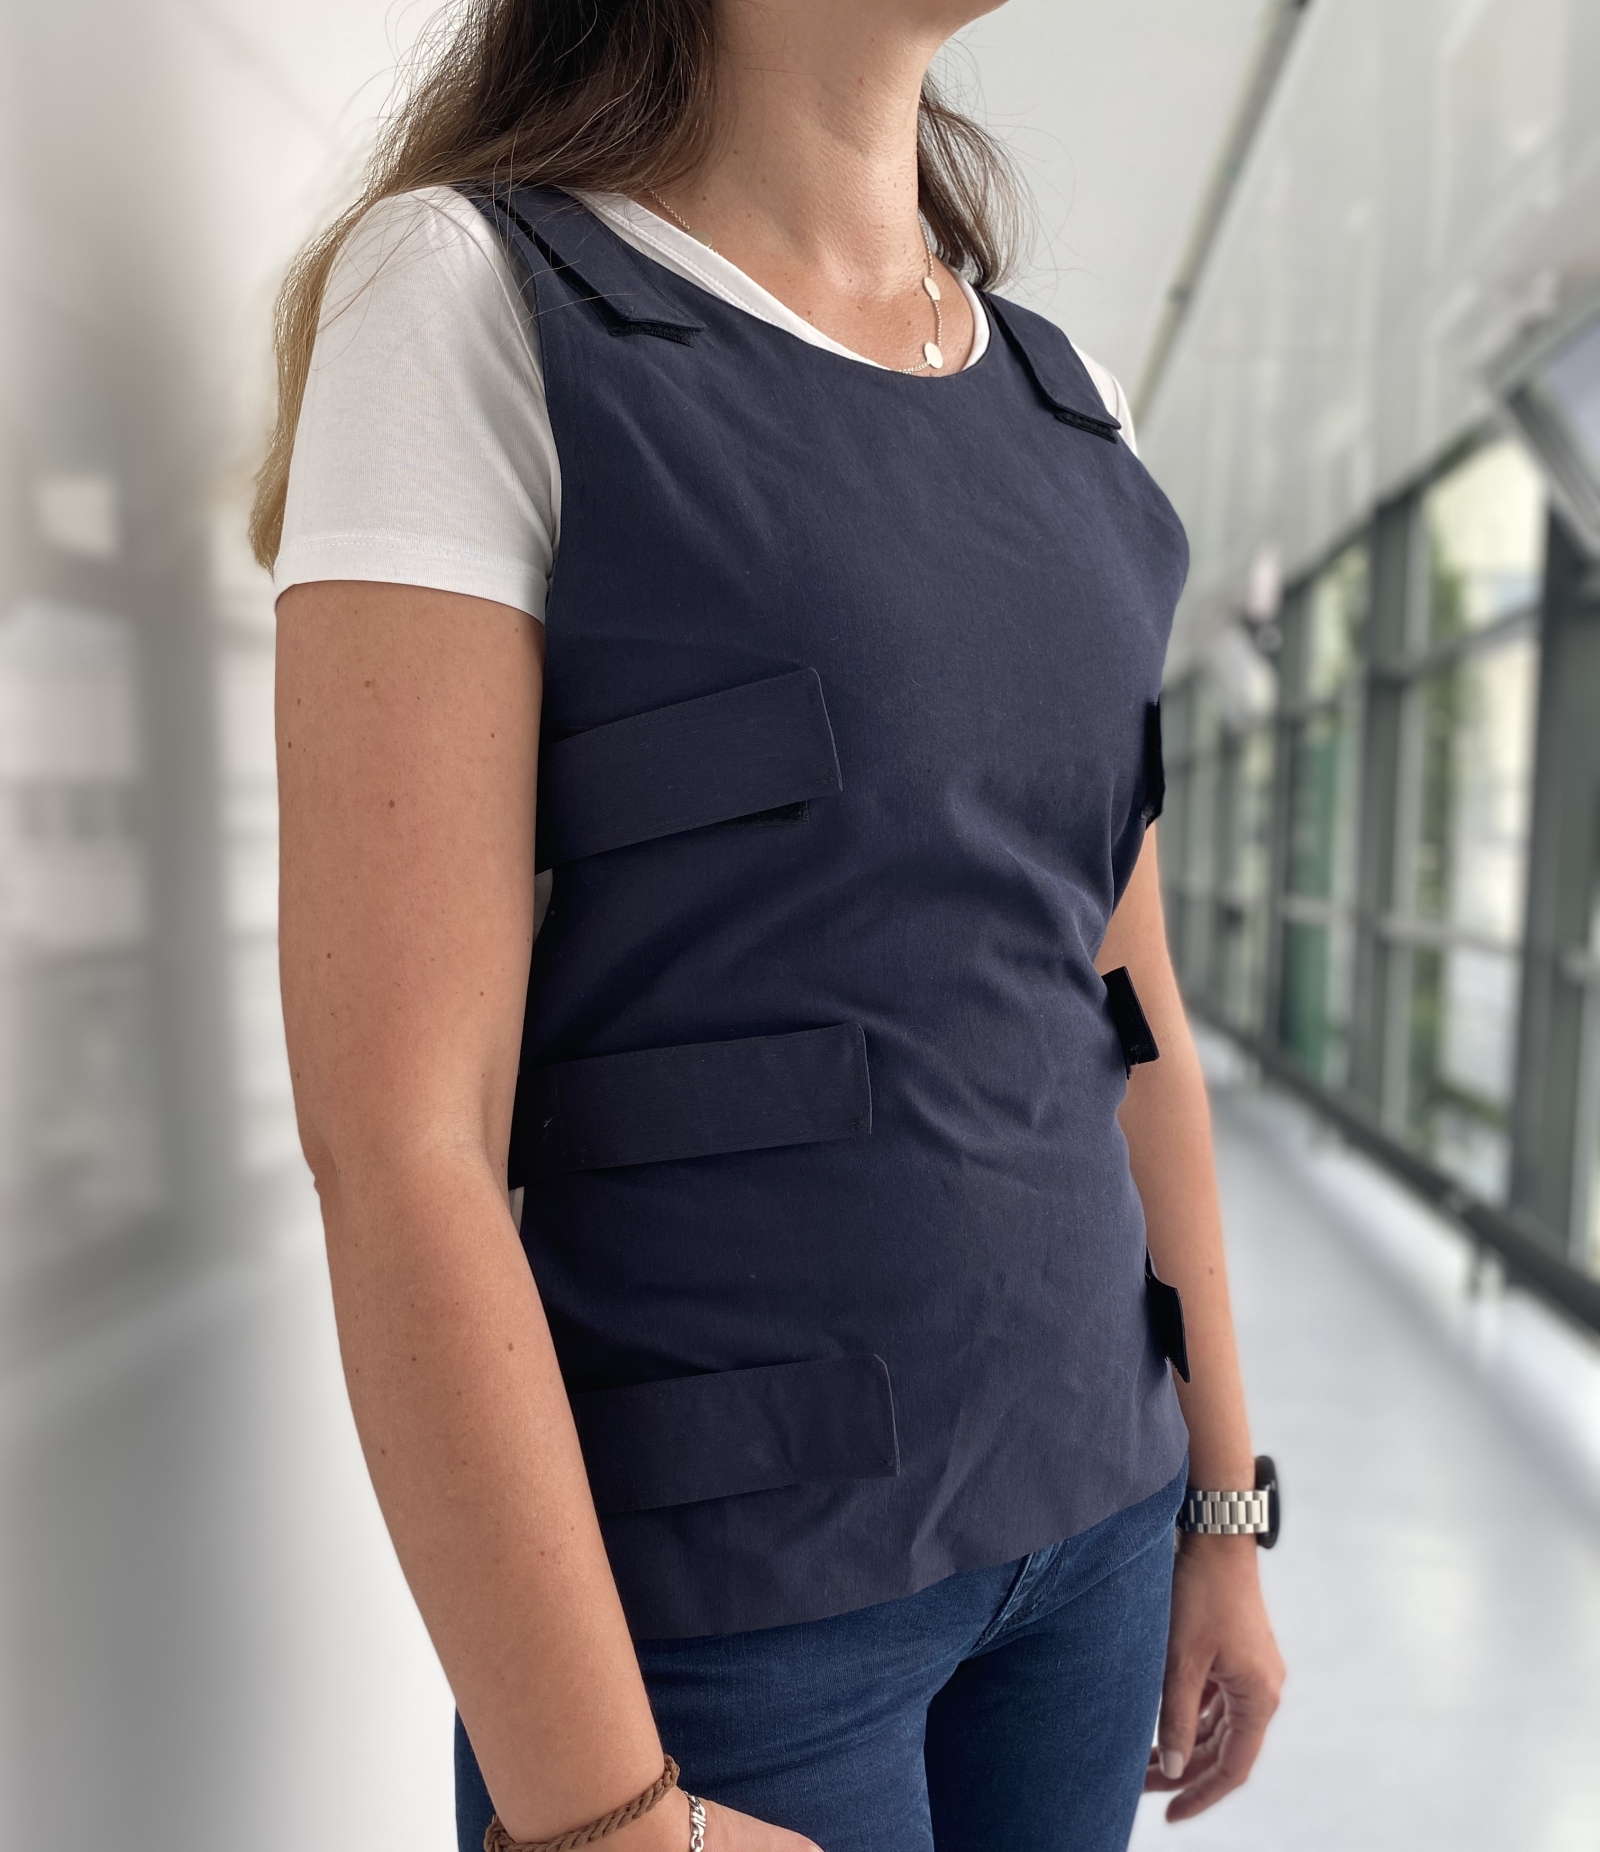 Acoustic sensors are integrated into the front and back of the textile vest to listen to the thorax.